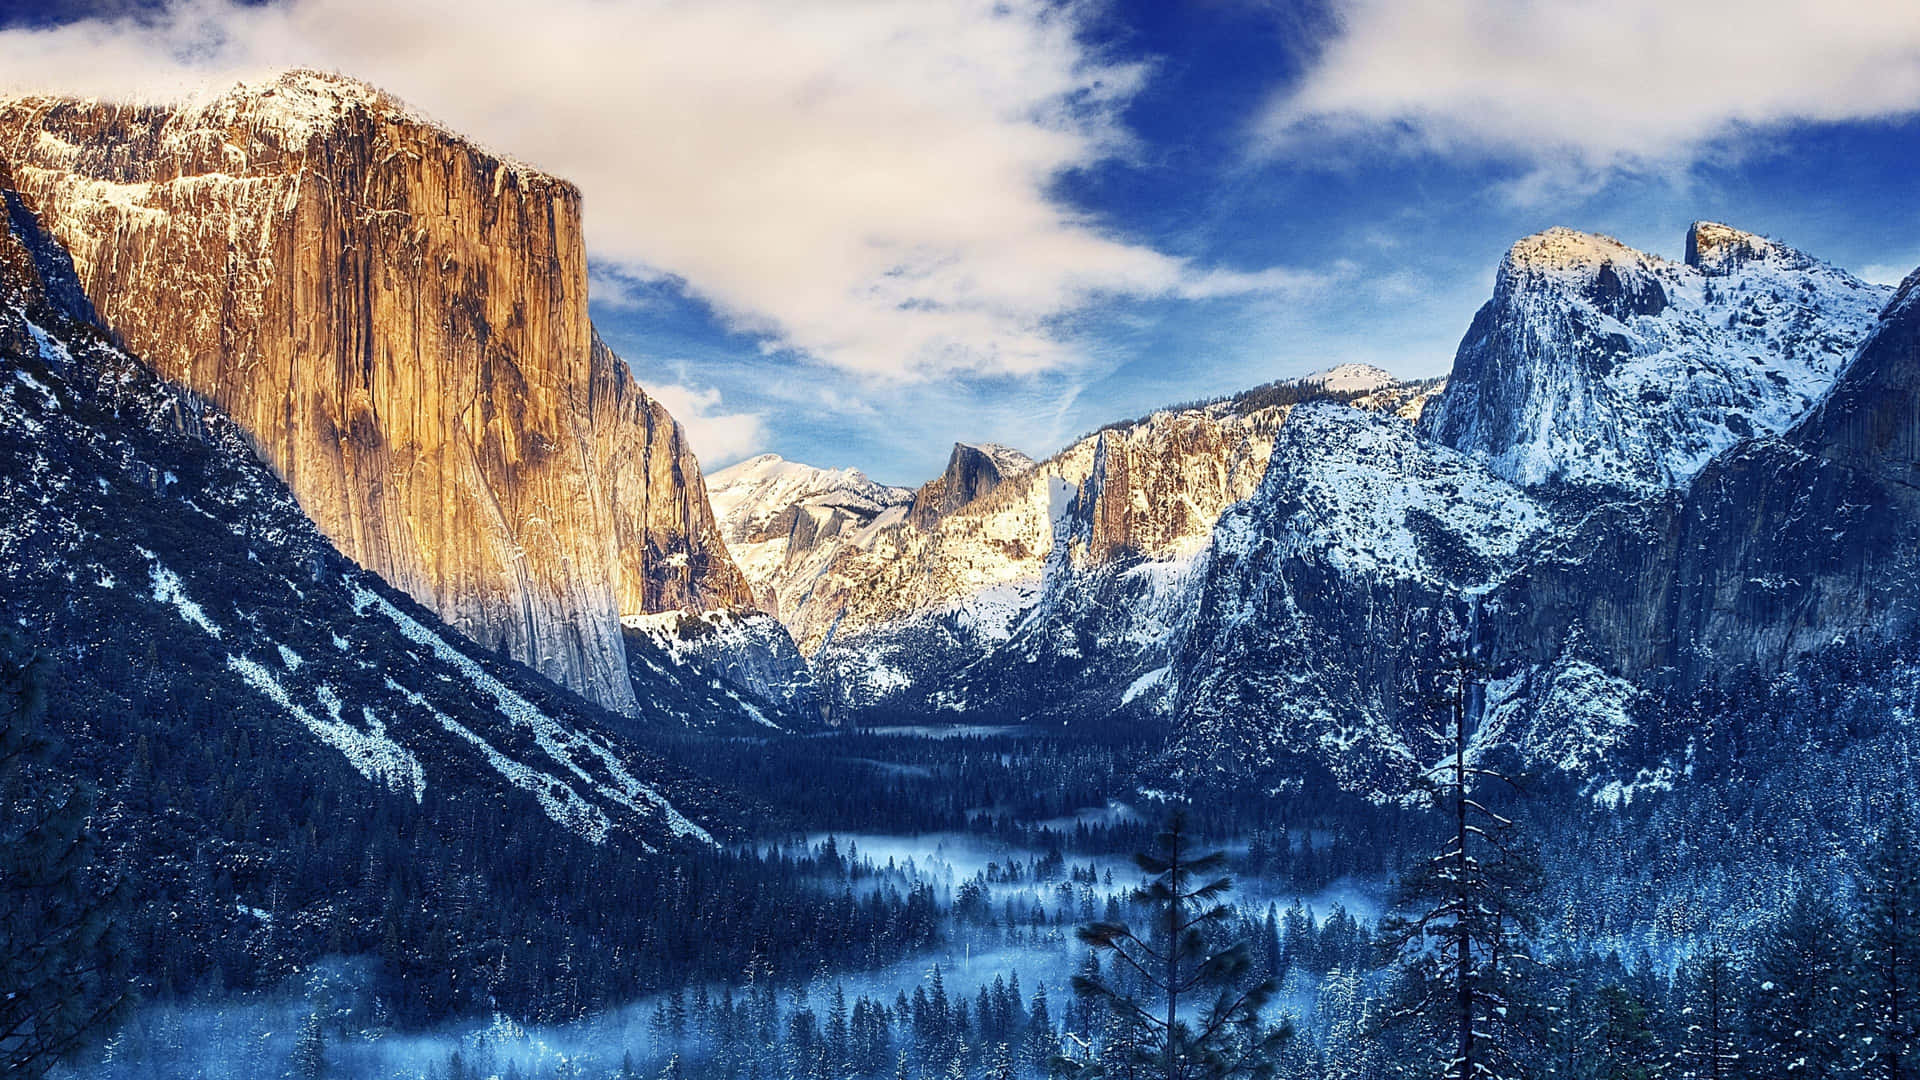 Yosemite Valley In Winter With Snow Covered Mountains